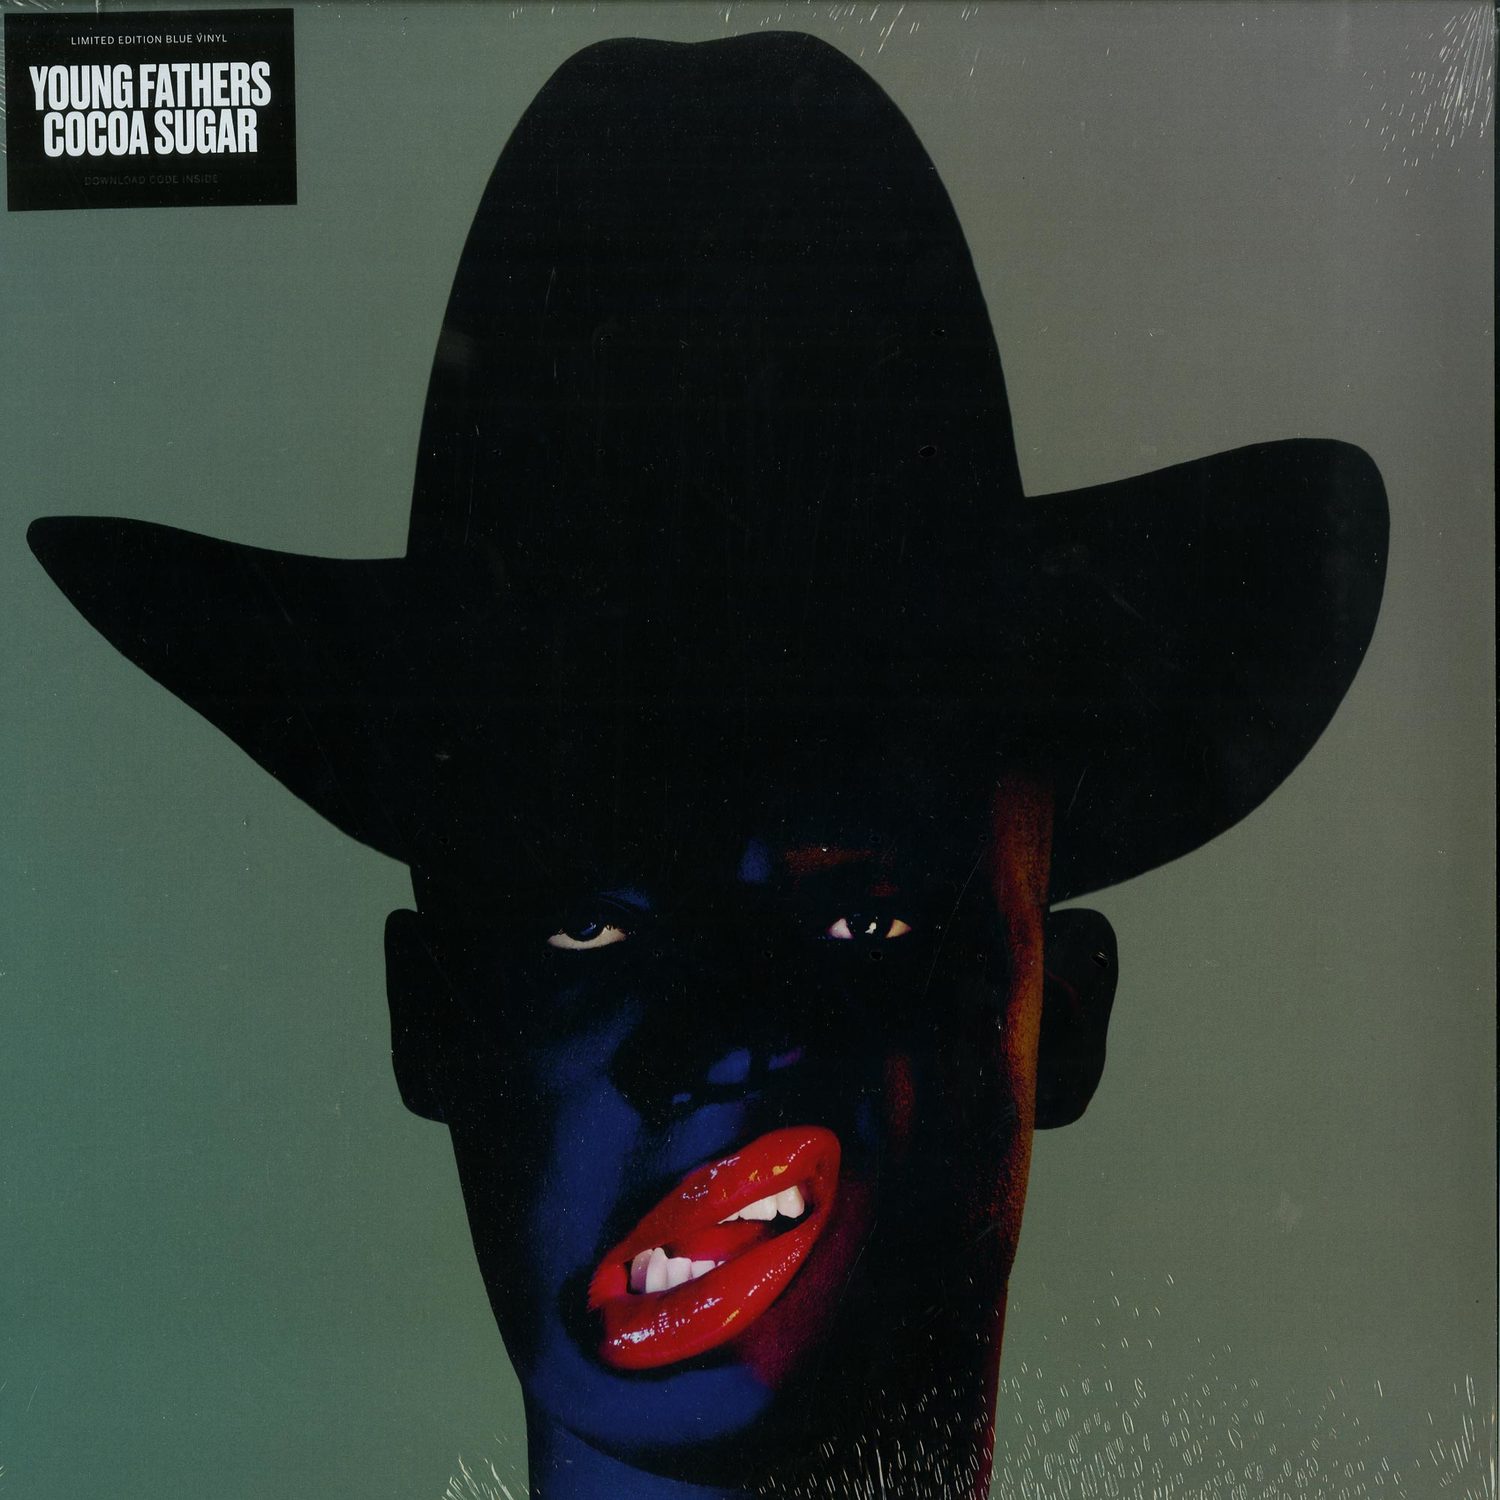 Young Fathers - COCOA SUGAR 